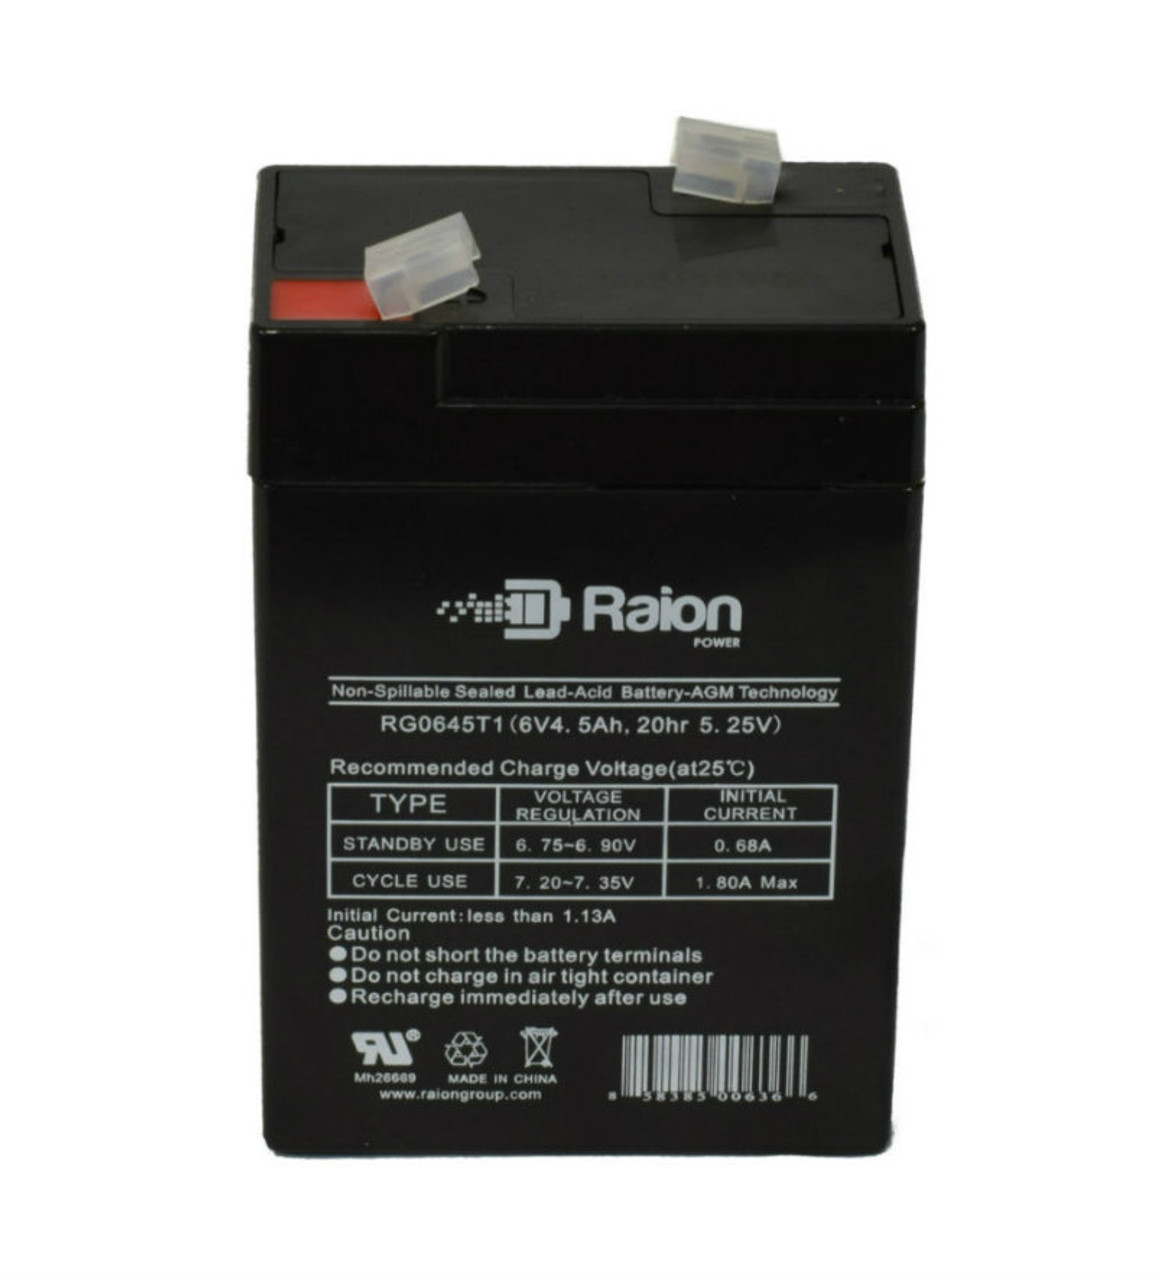 Raion Power RG0645T1 Replacement Battery Cartridge for Palma PM5A-6